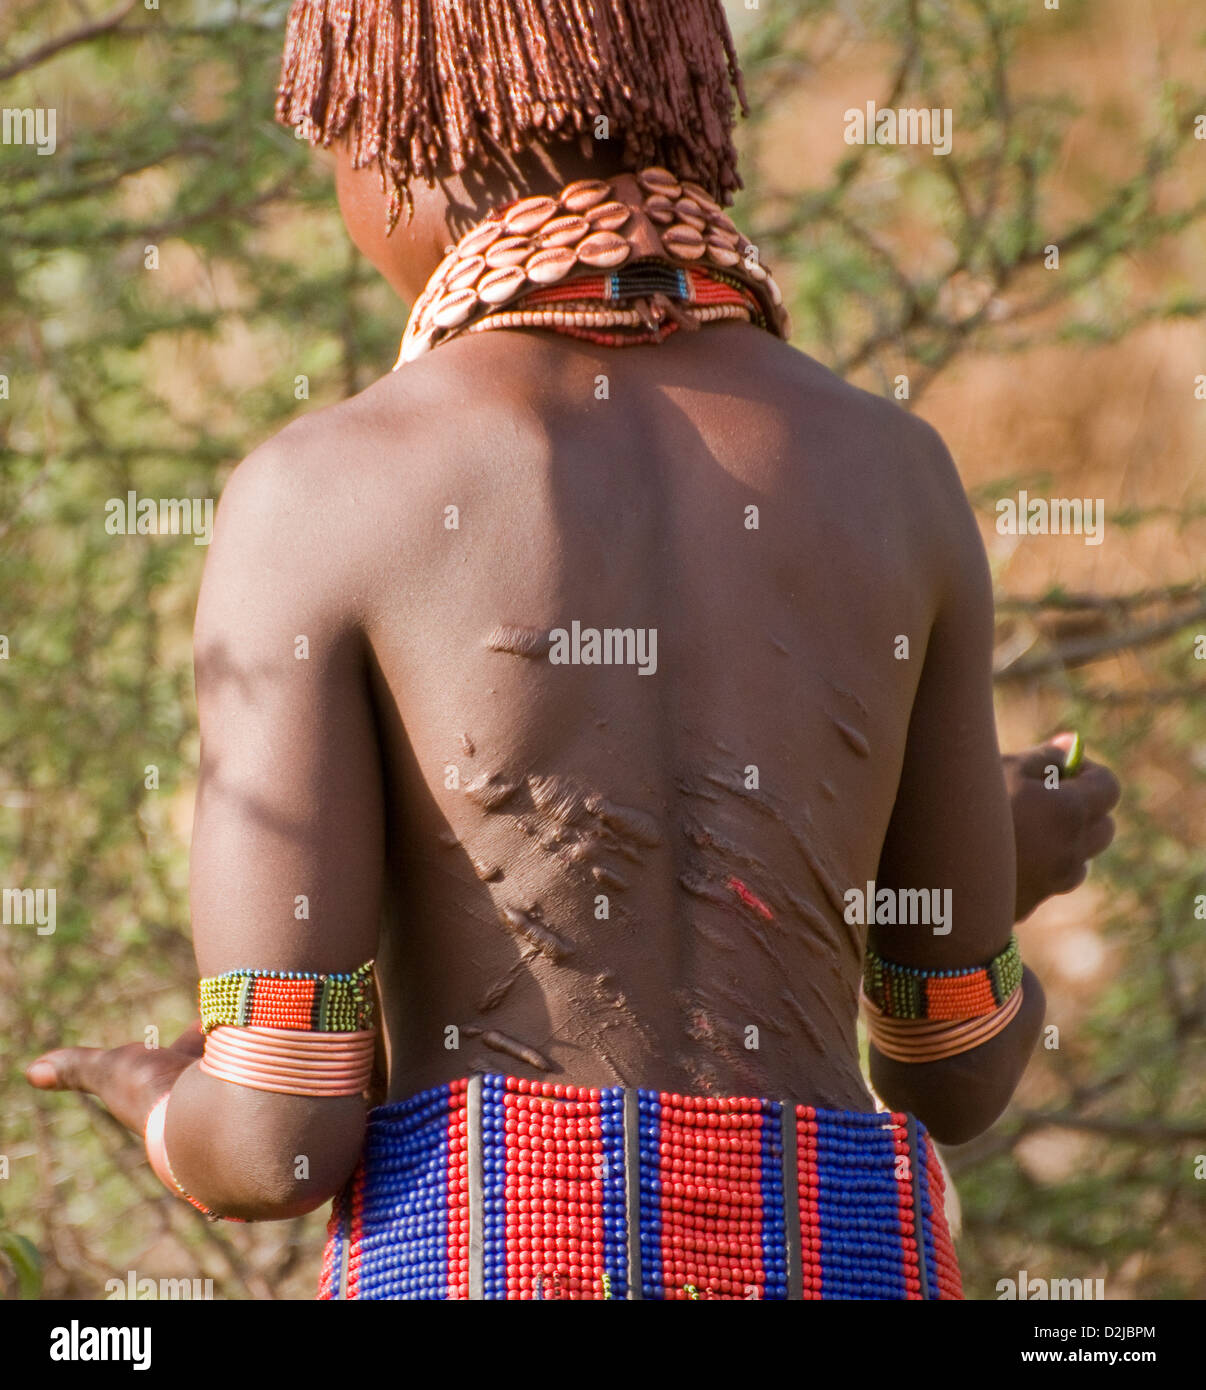 Hamar woman with scars on back from whipping during ceremony Stock Photo